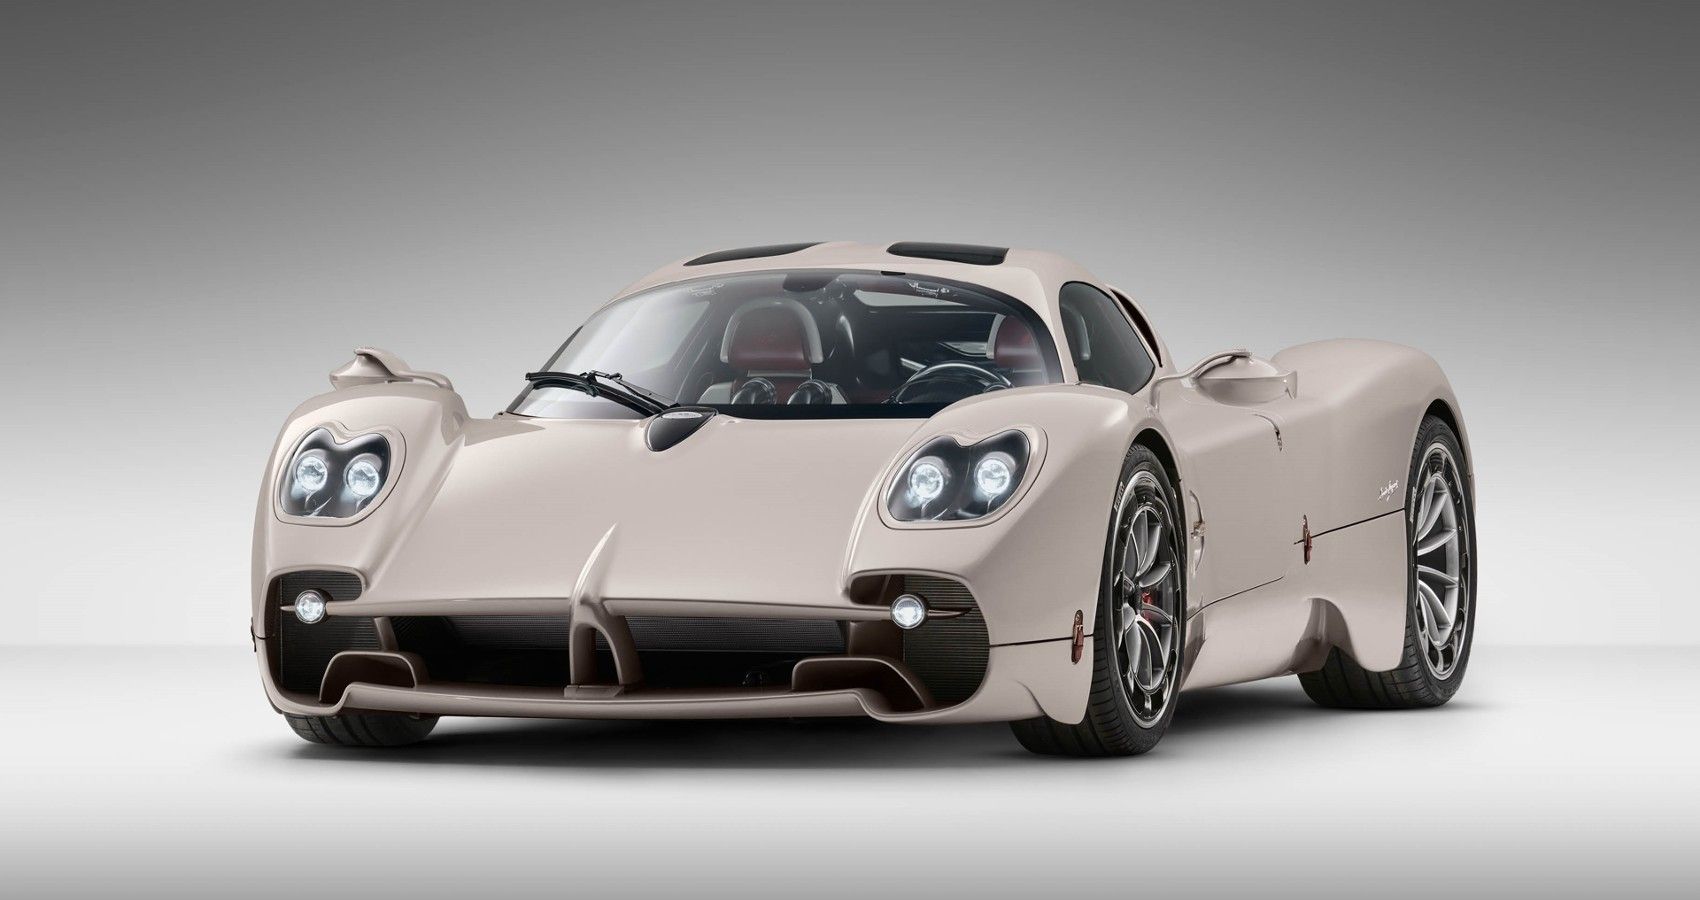 10 Things To Know About The Pagani Utopia, A Masterpiece Of Luxury And Power